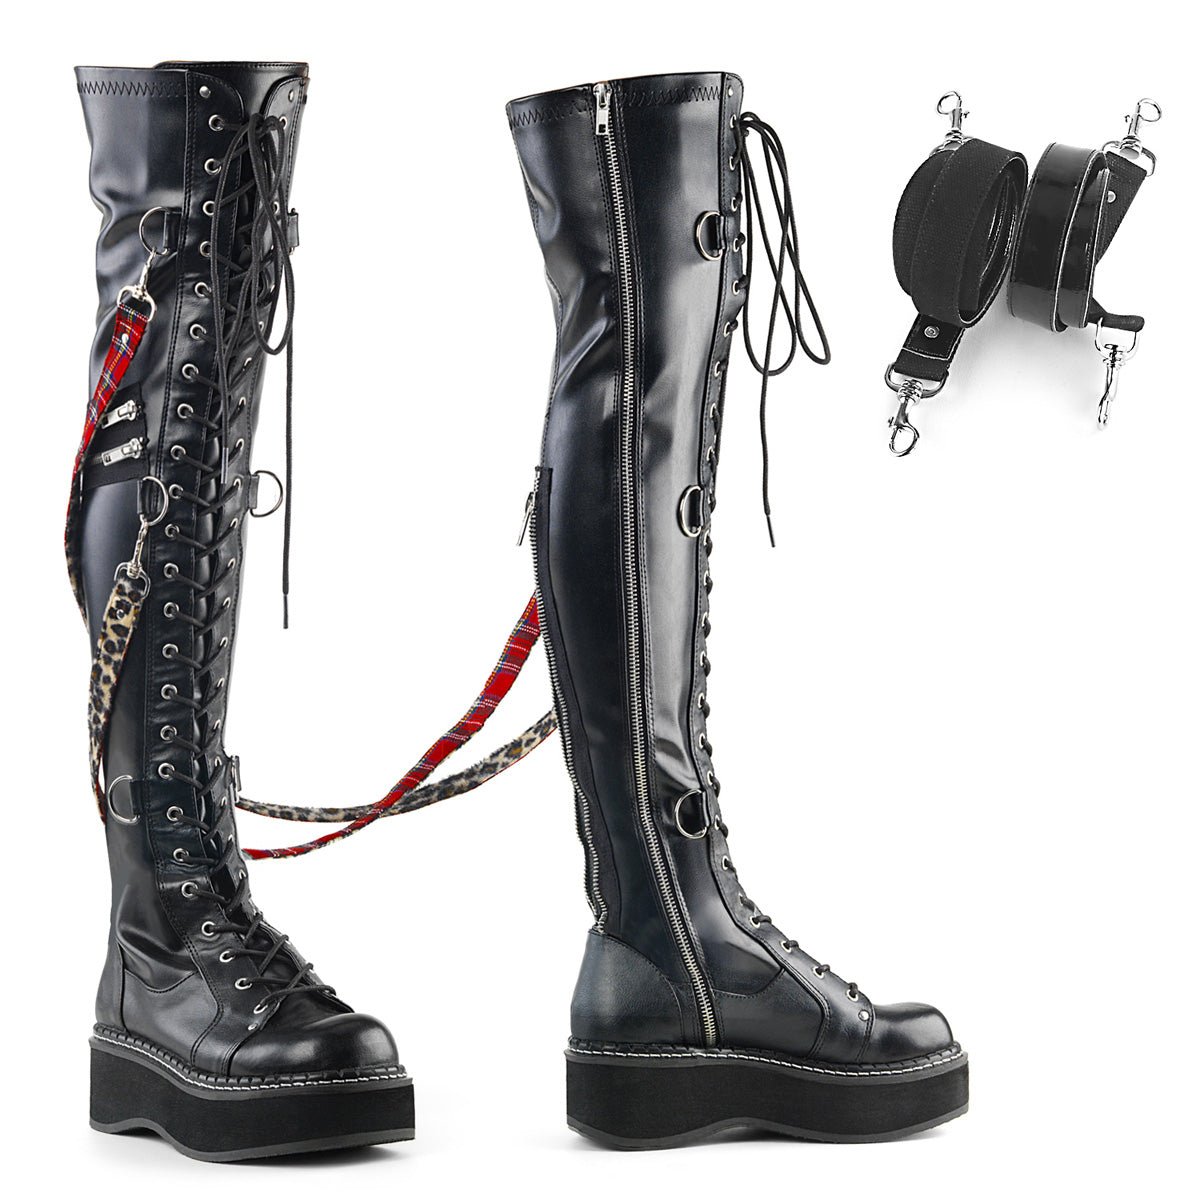 Too Fast | Demonia Emily 377 | Black Stretch Vegan Leather Women's Over The Knee Boots